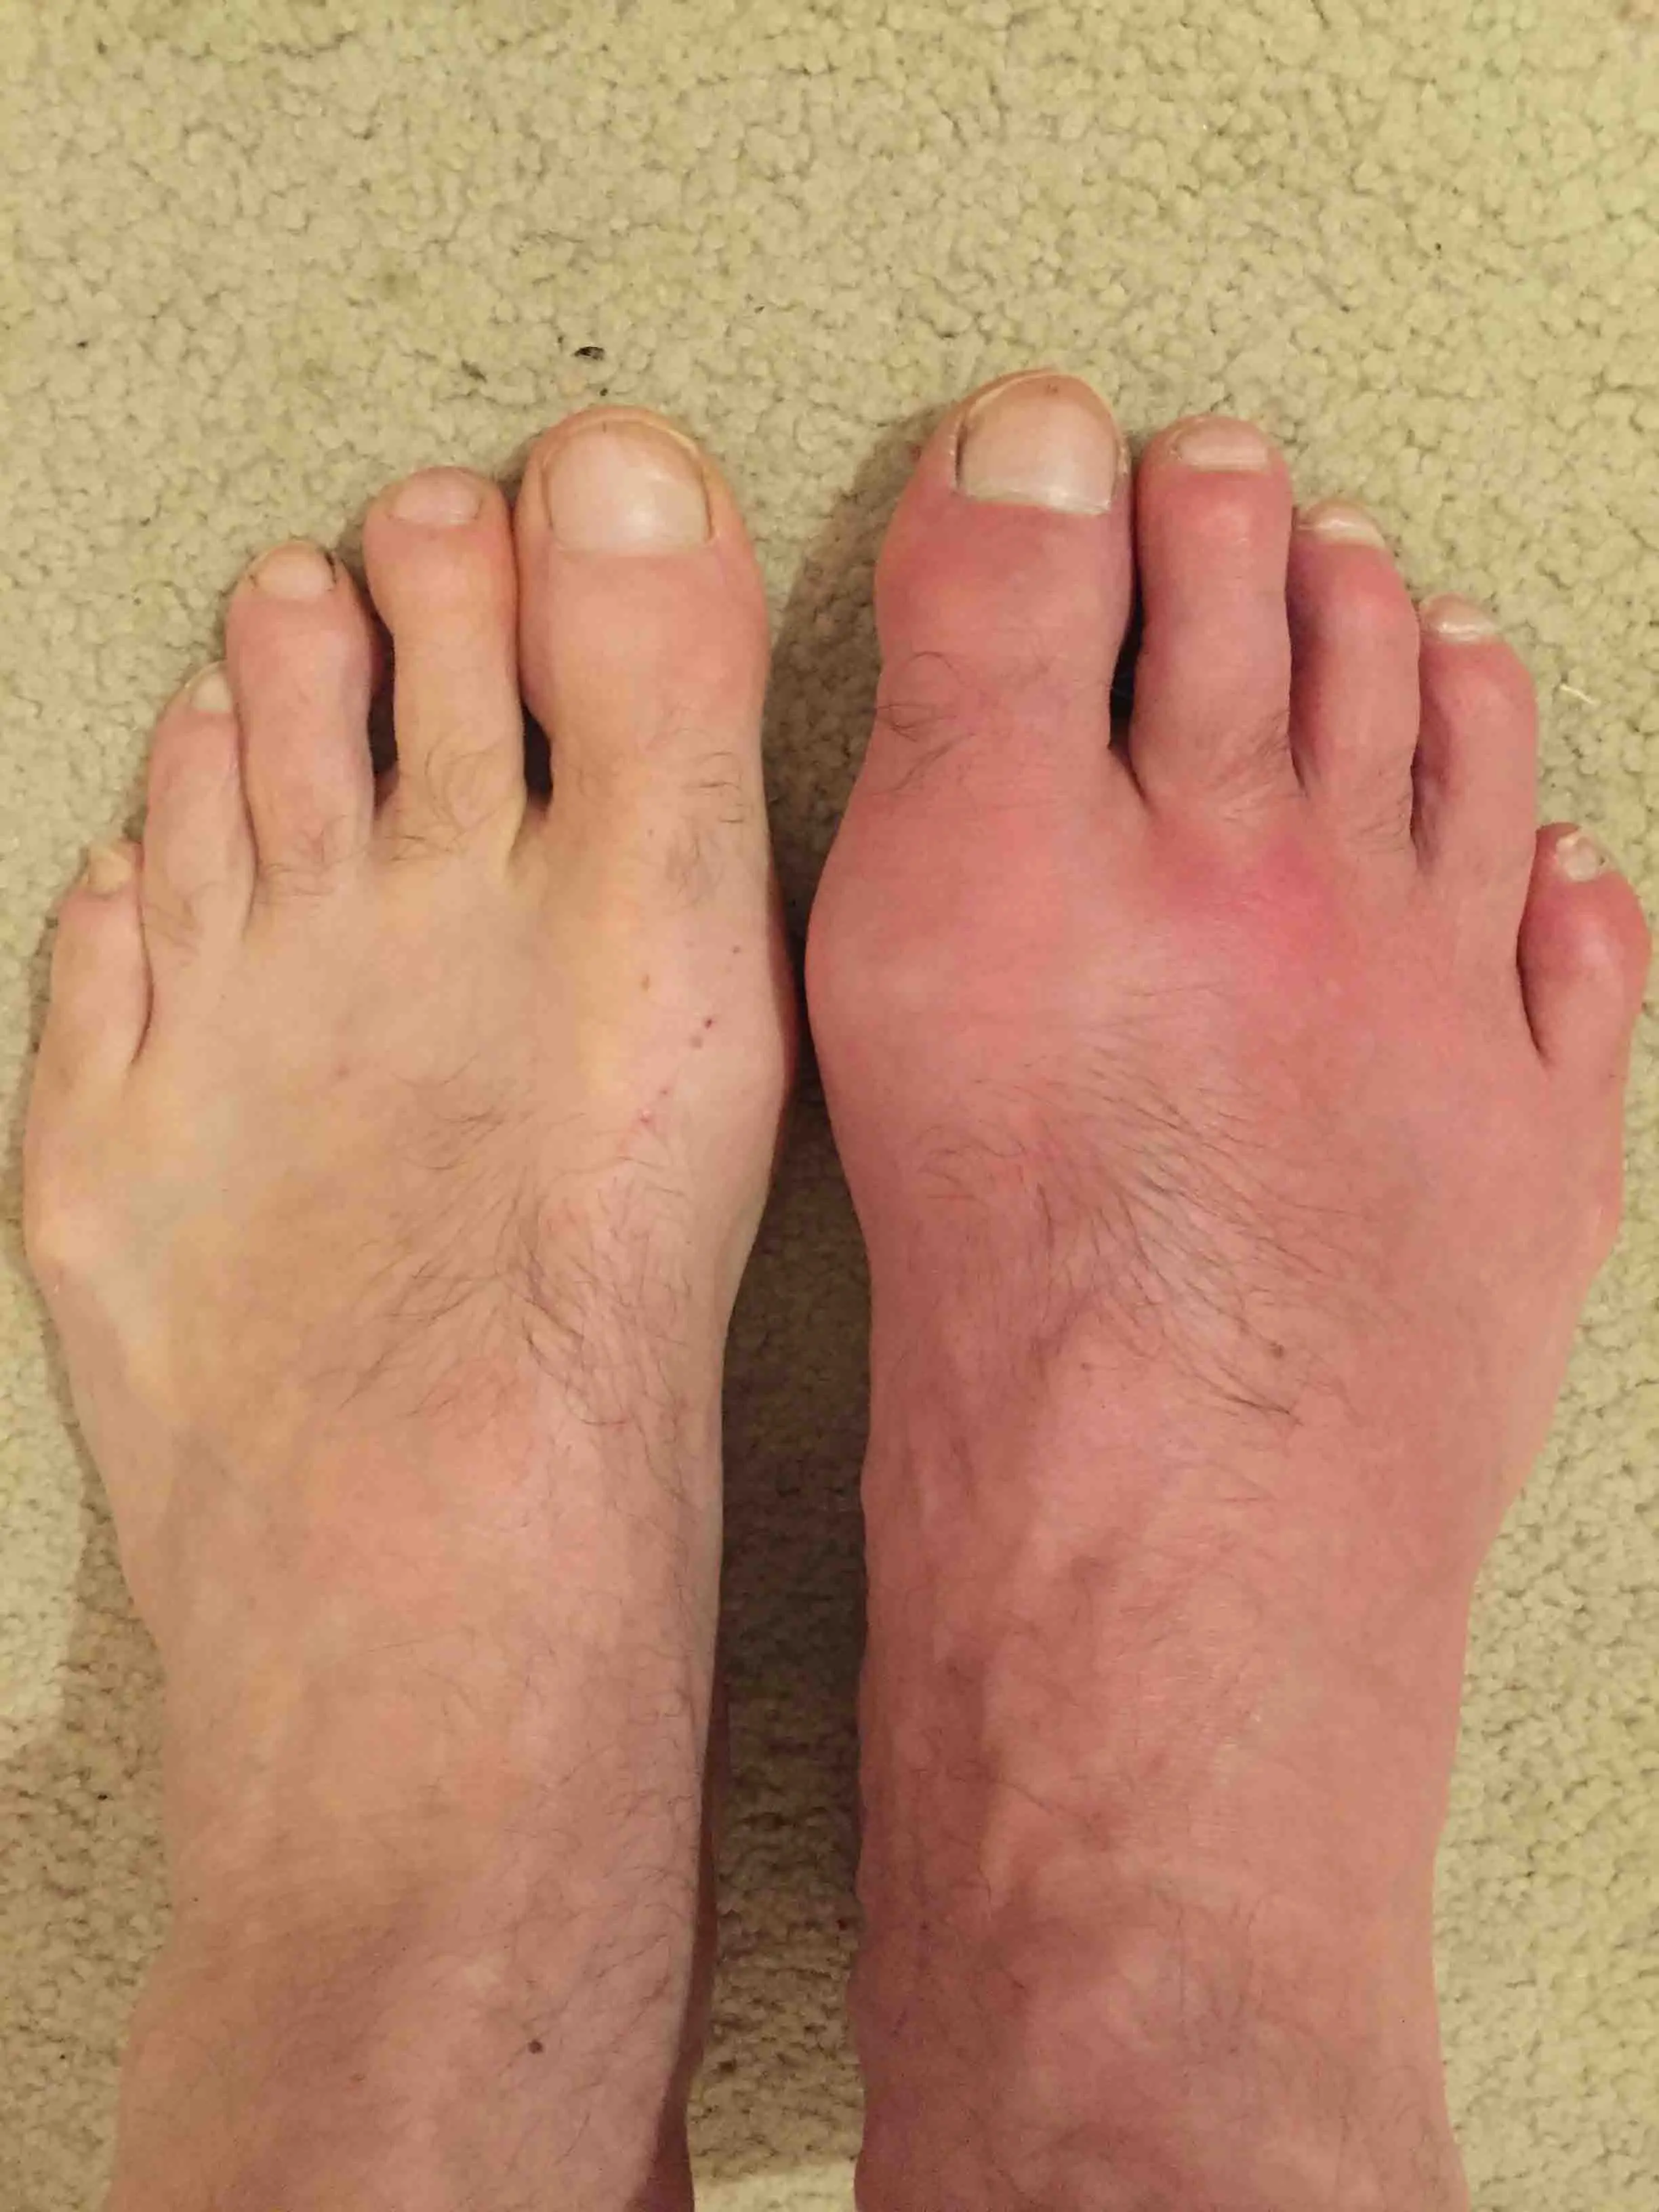 Pictures Of Gout 52